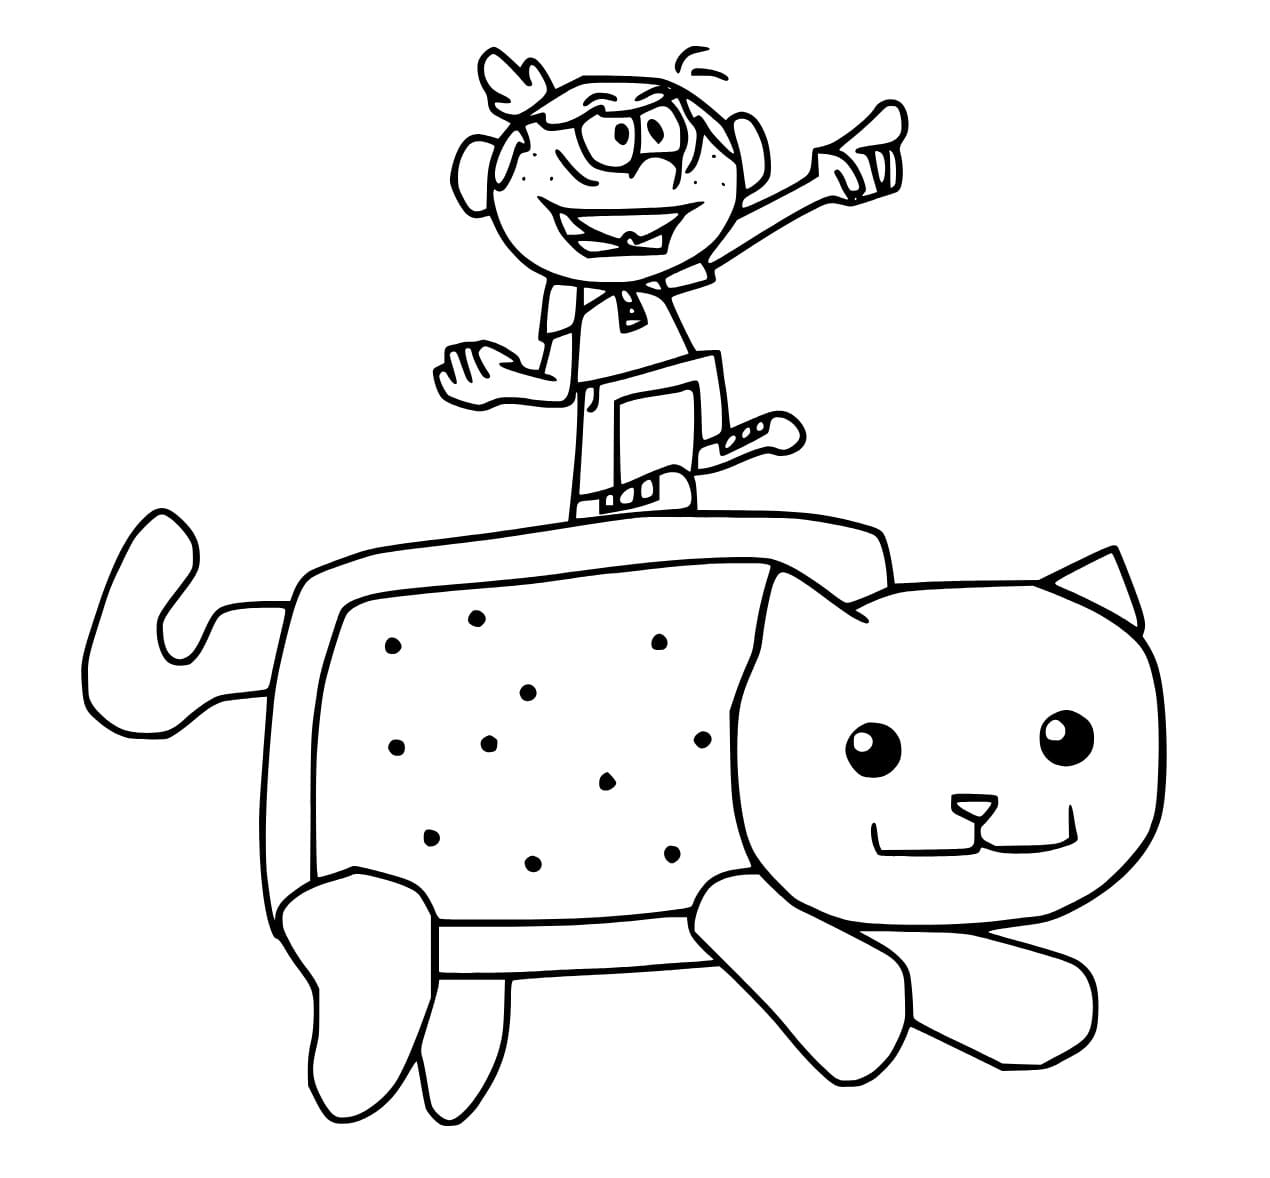 Adorable nyan cat coloring page